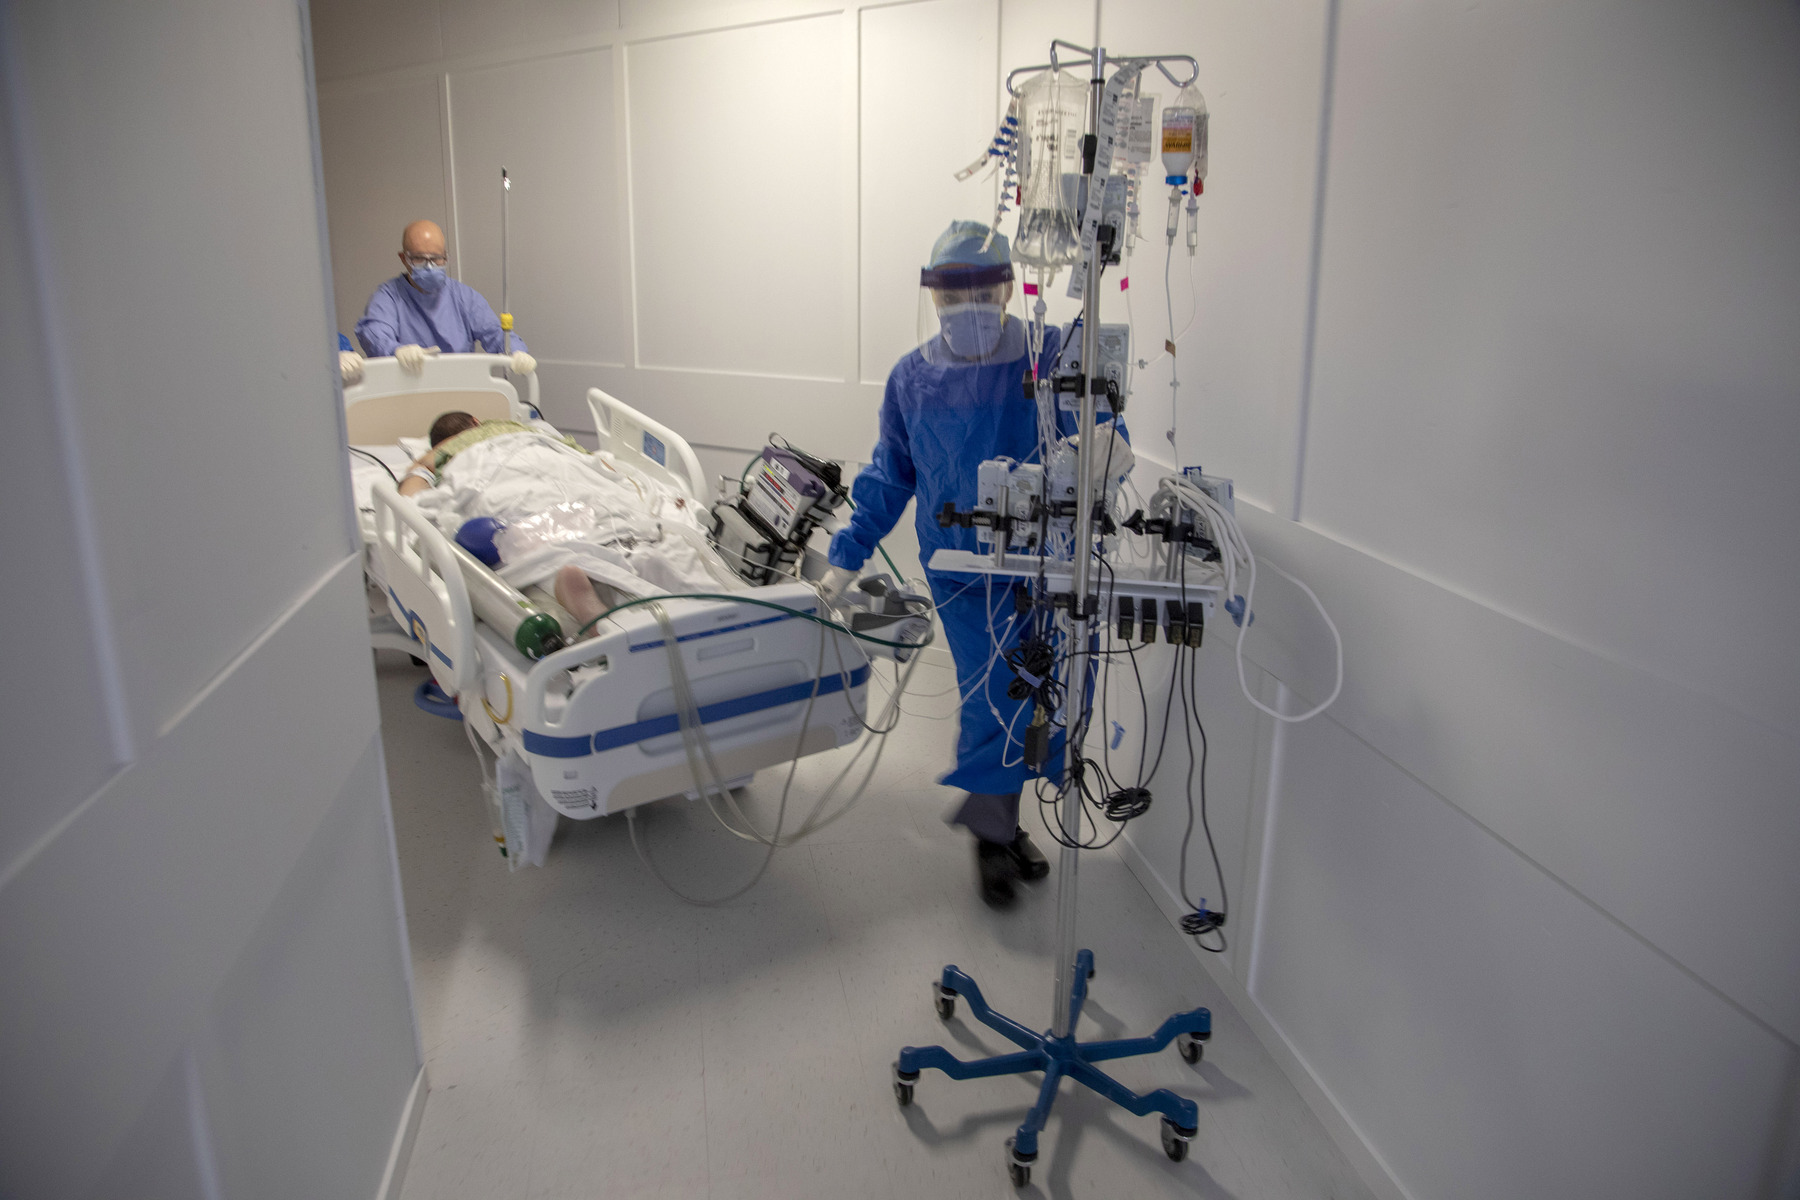 Patients are transported to a new ICU area built to cope with the growing number of COVID-19 patients. 4/2/2020 Photos by Jeff Rhode